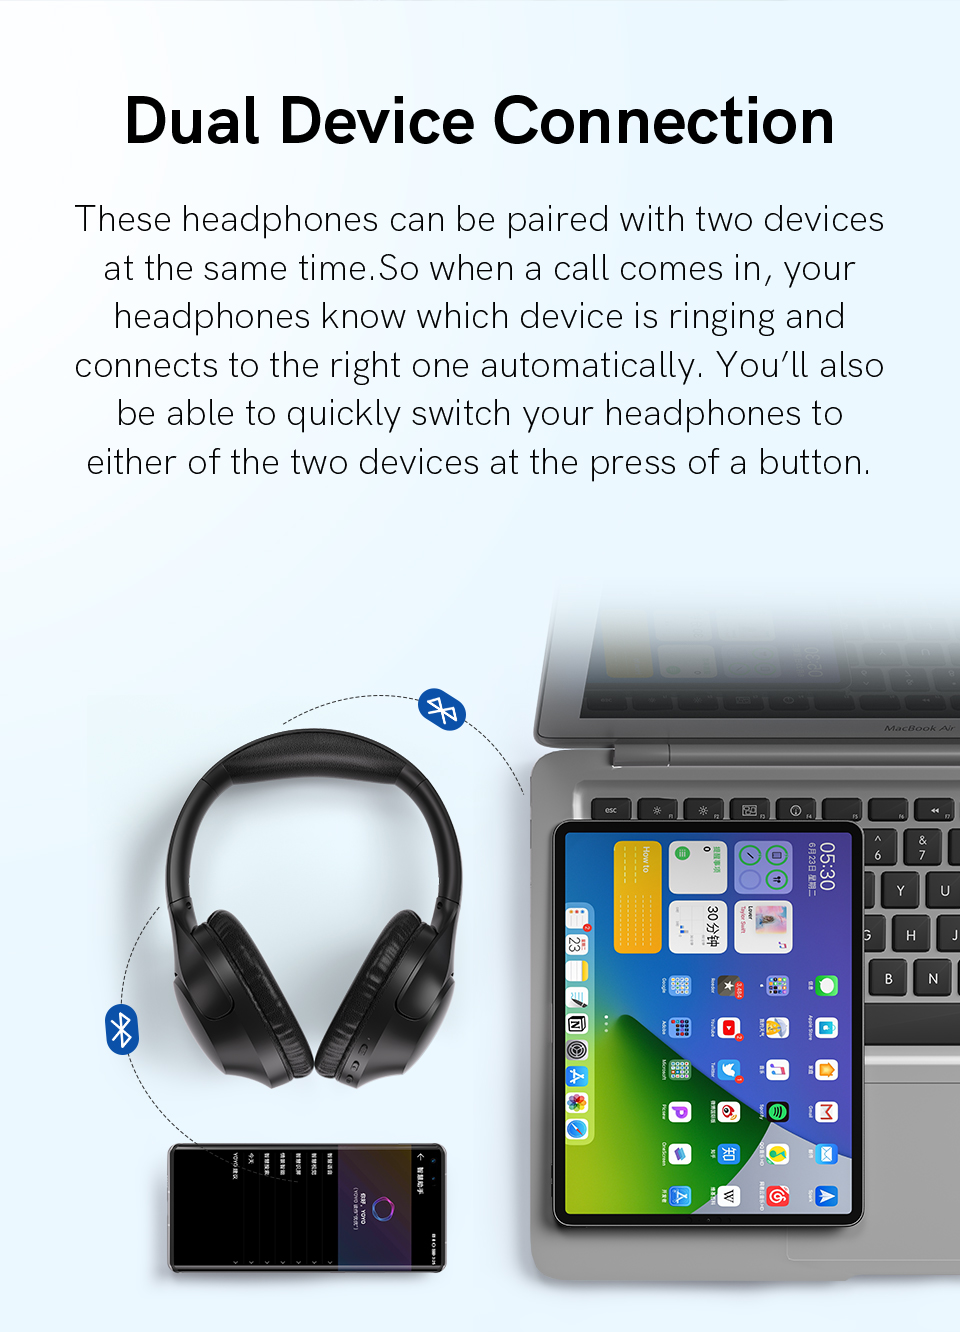 QCY H2 Wireless Headphones with Bluetooth 5.3